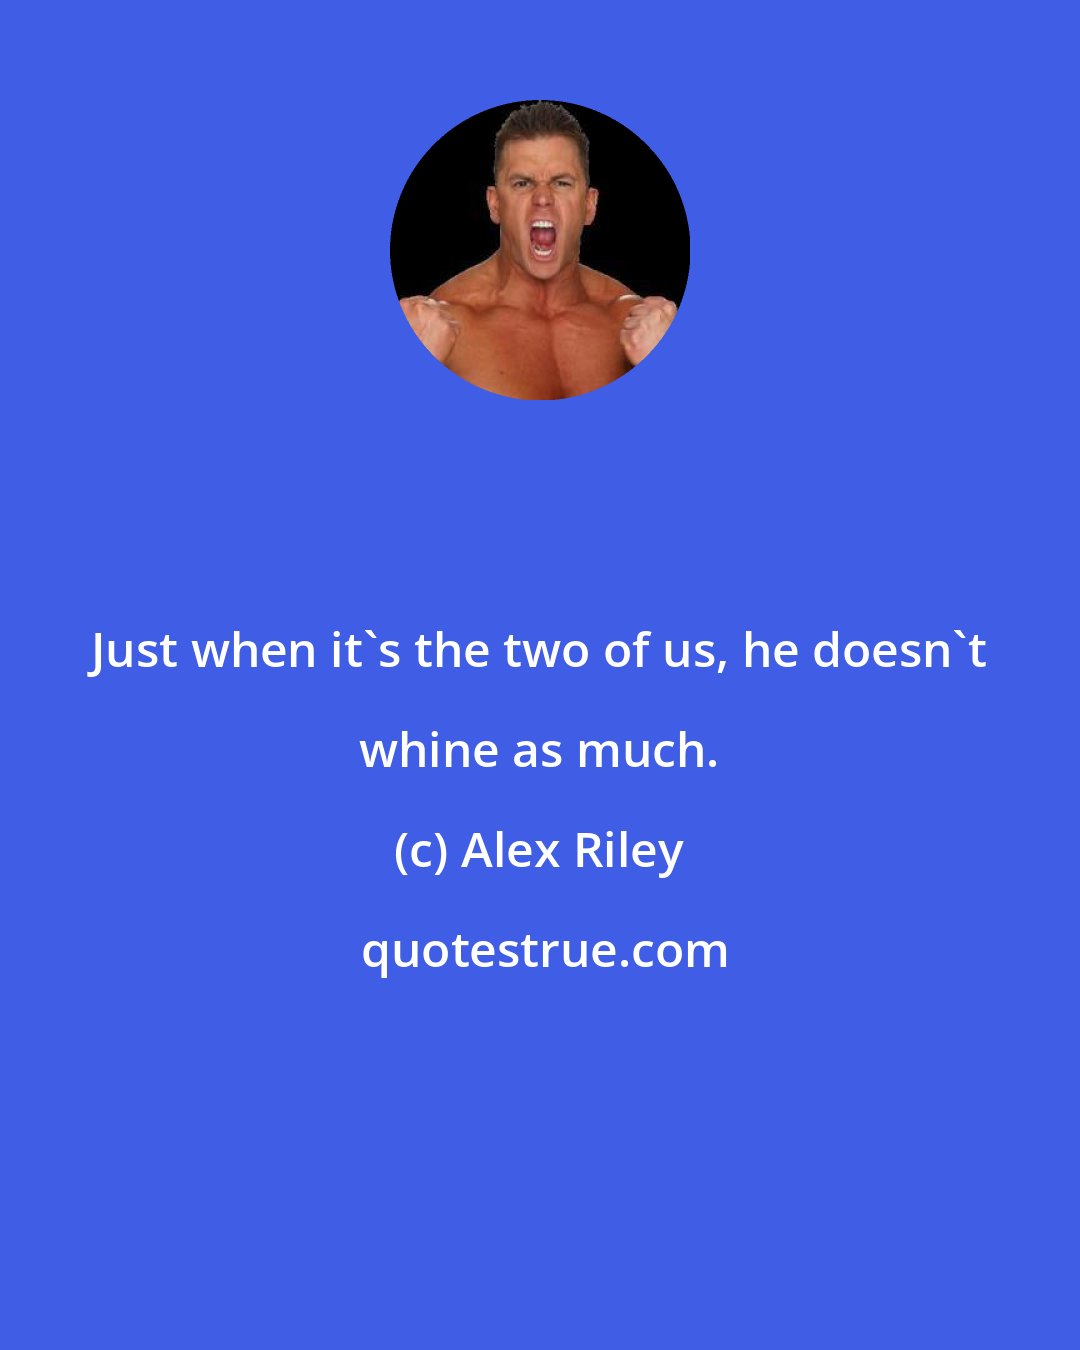 Alex Riley: Just when it's the two of us, he doesn't whine as much.